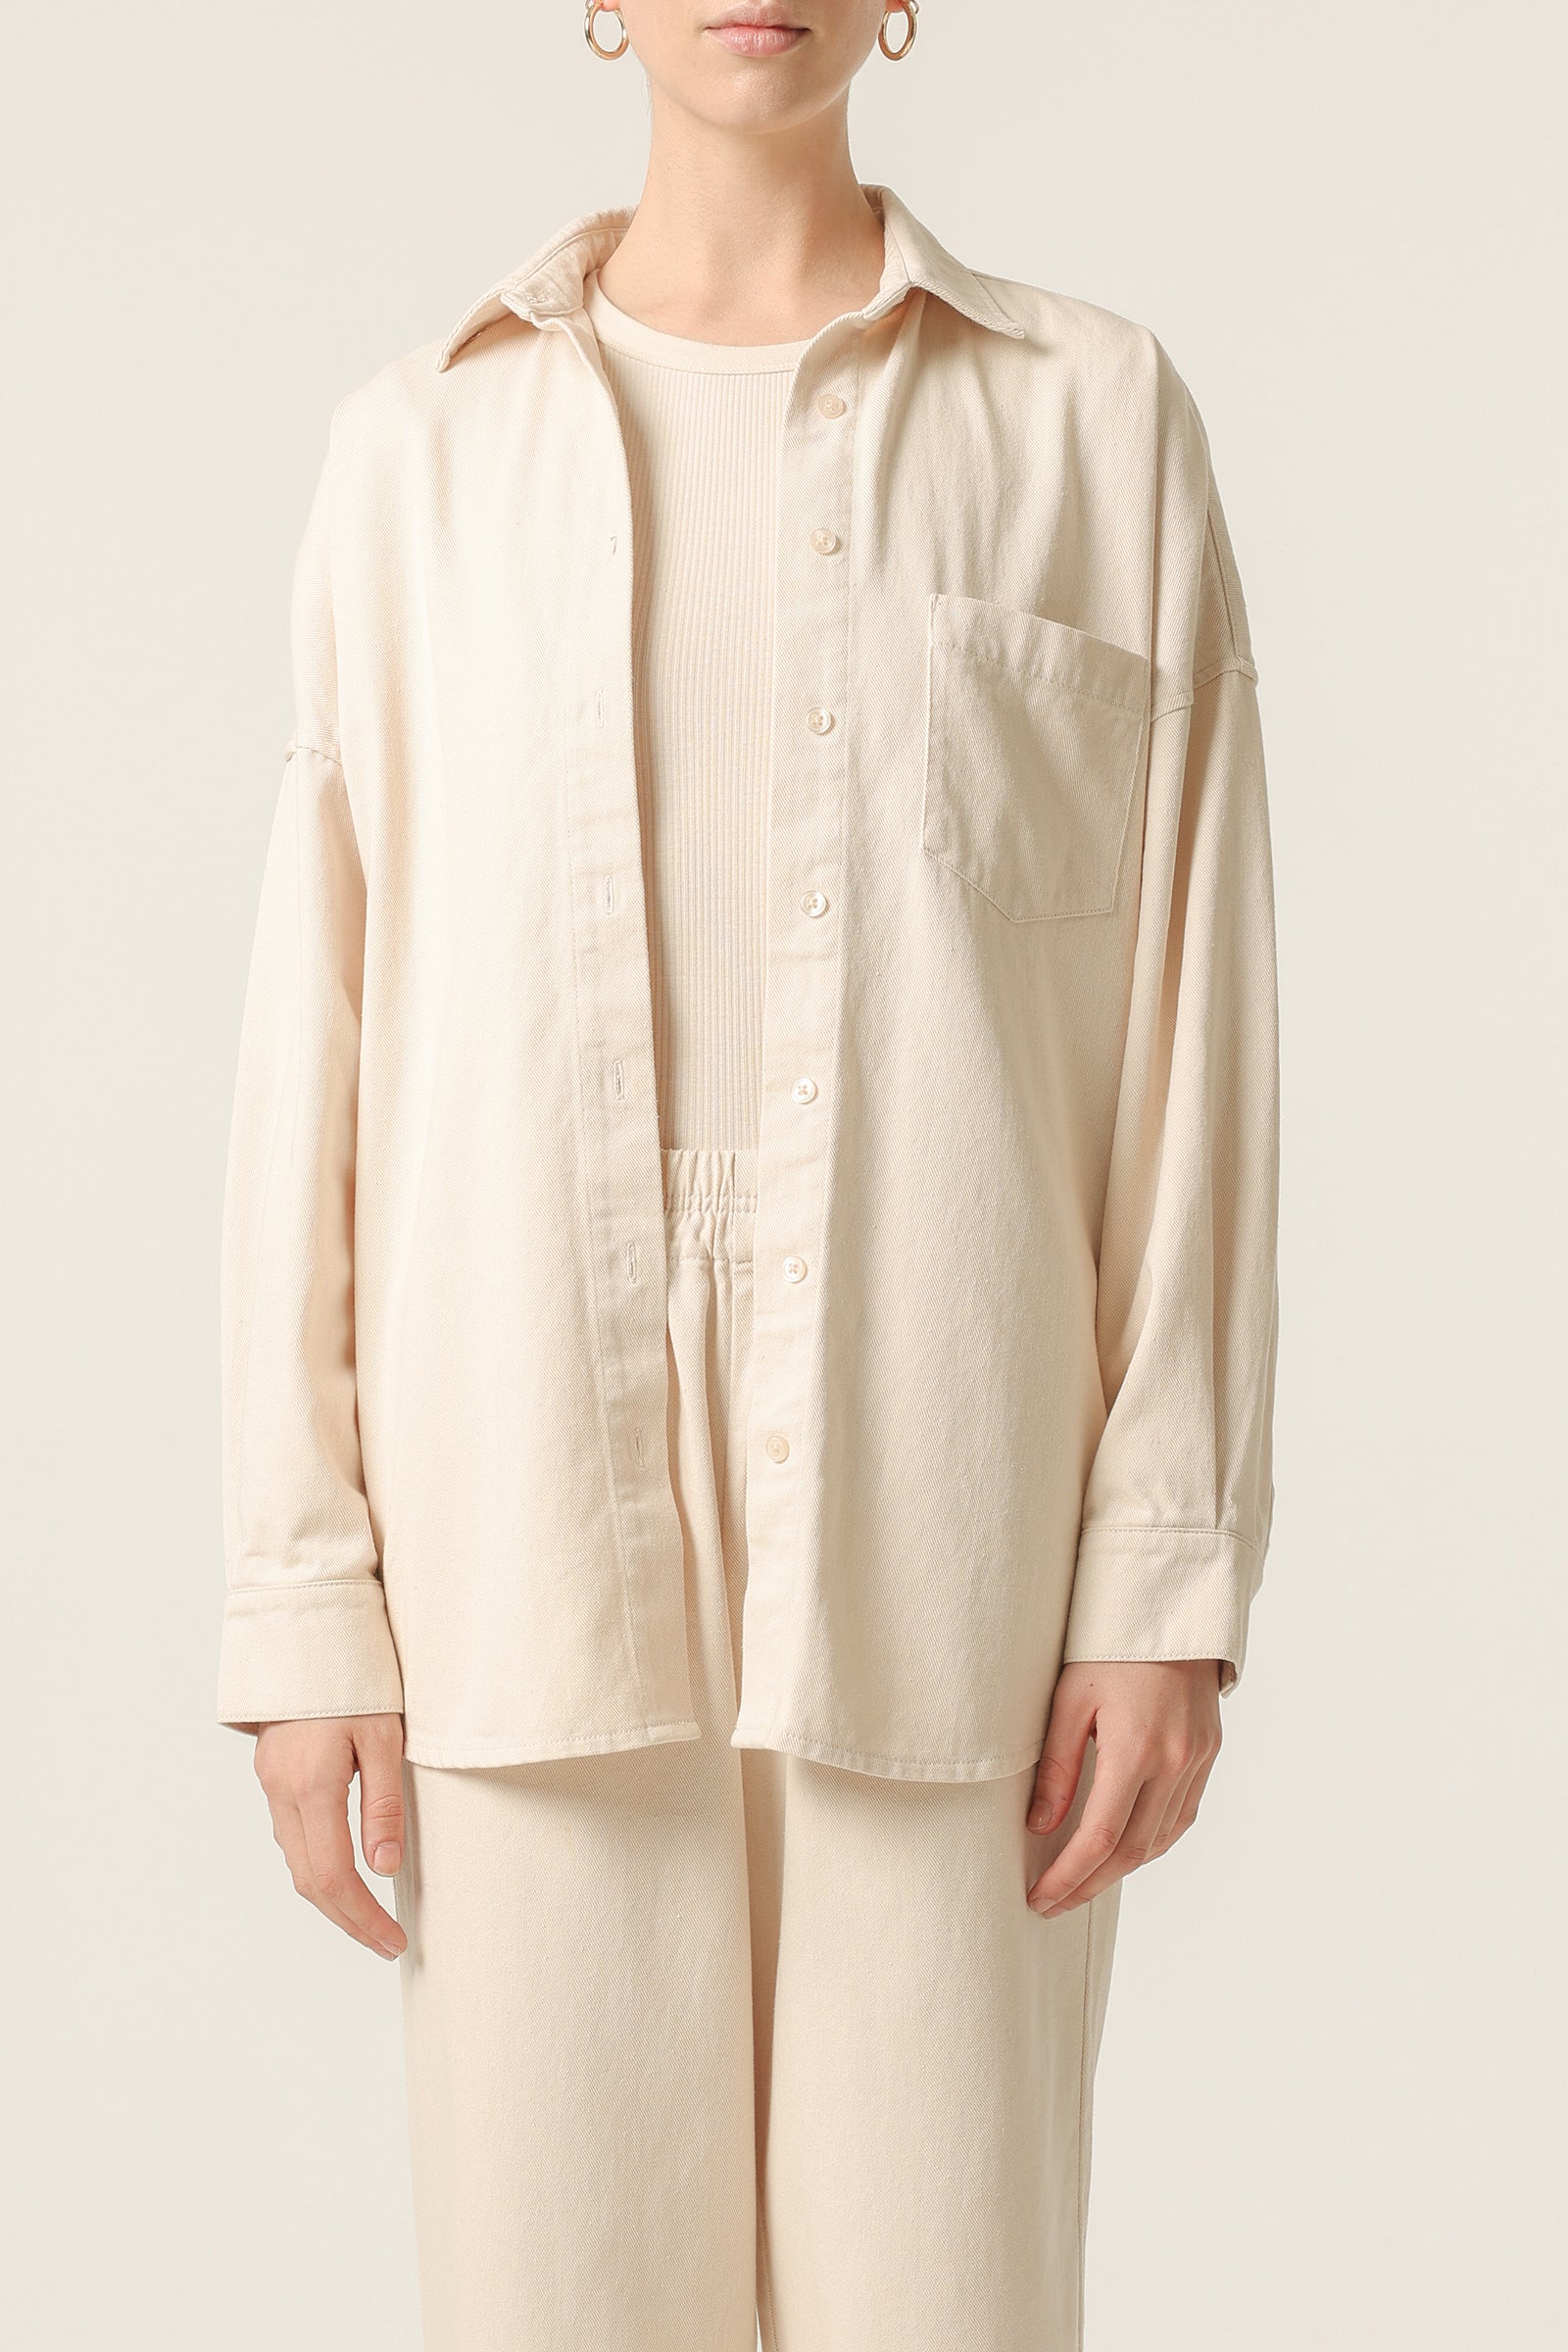 Nude Lucy Denver Shirt In White Cloud 